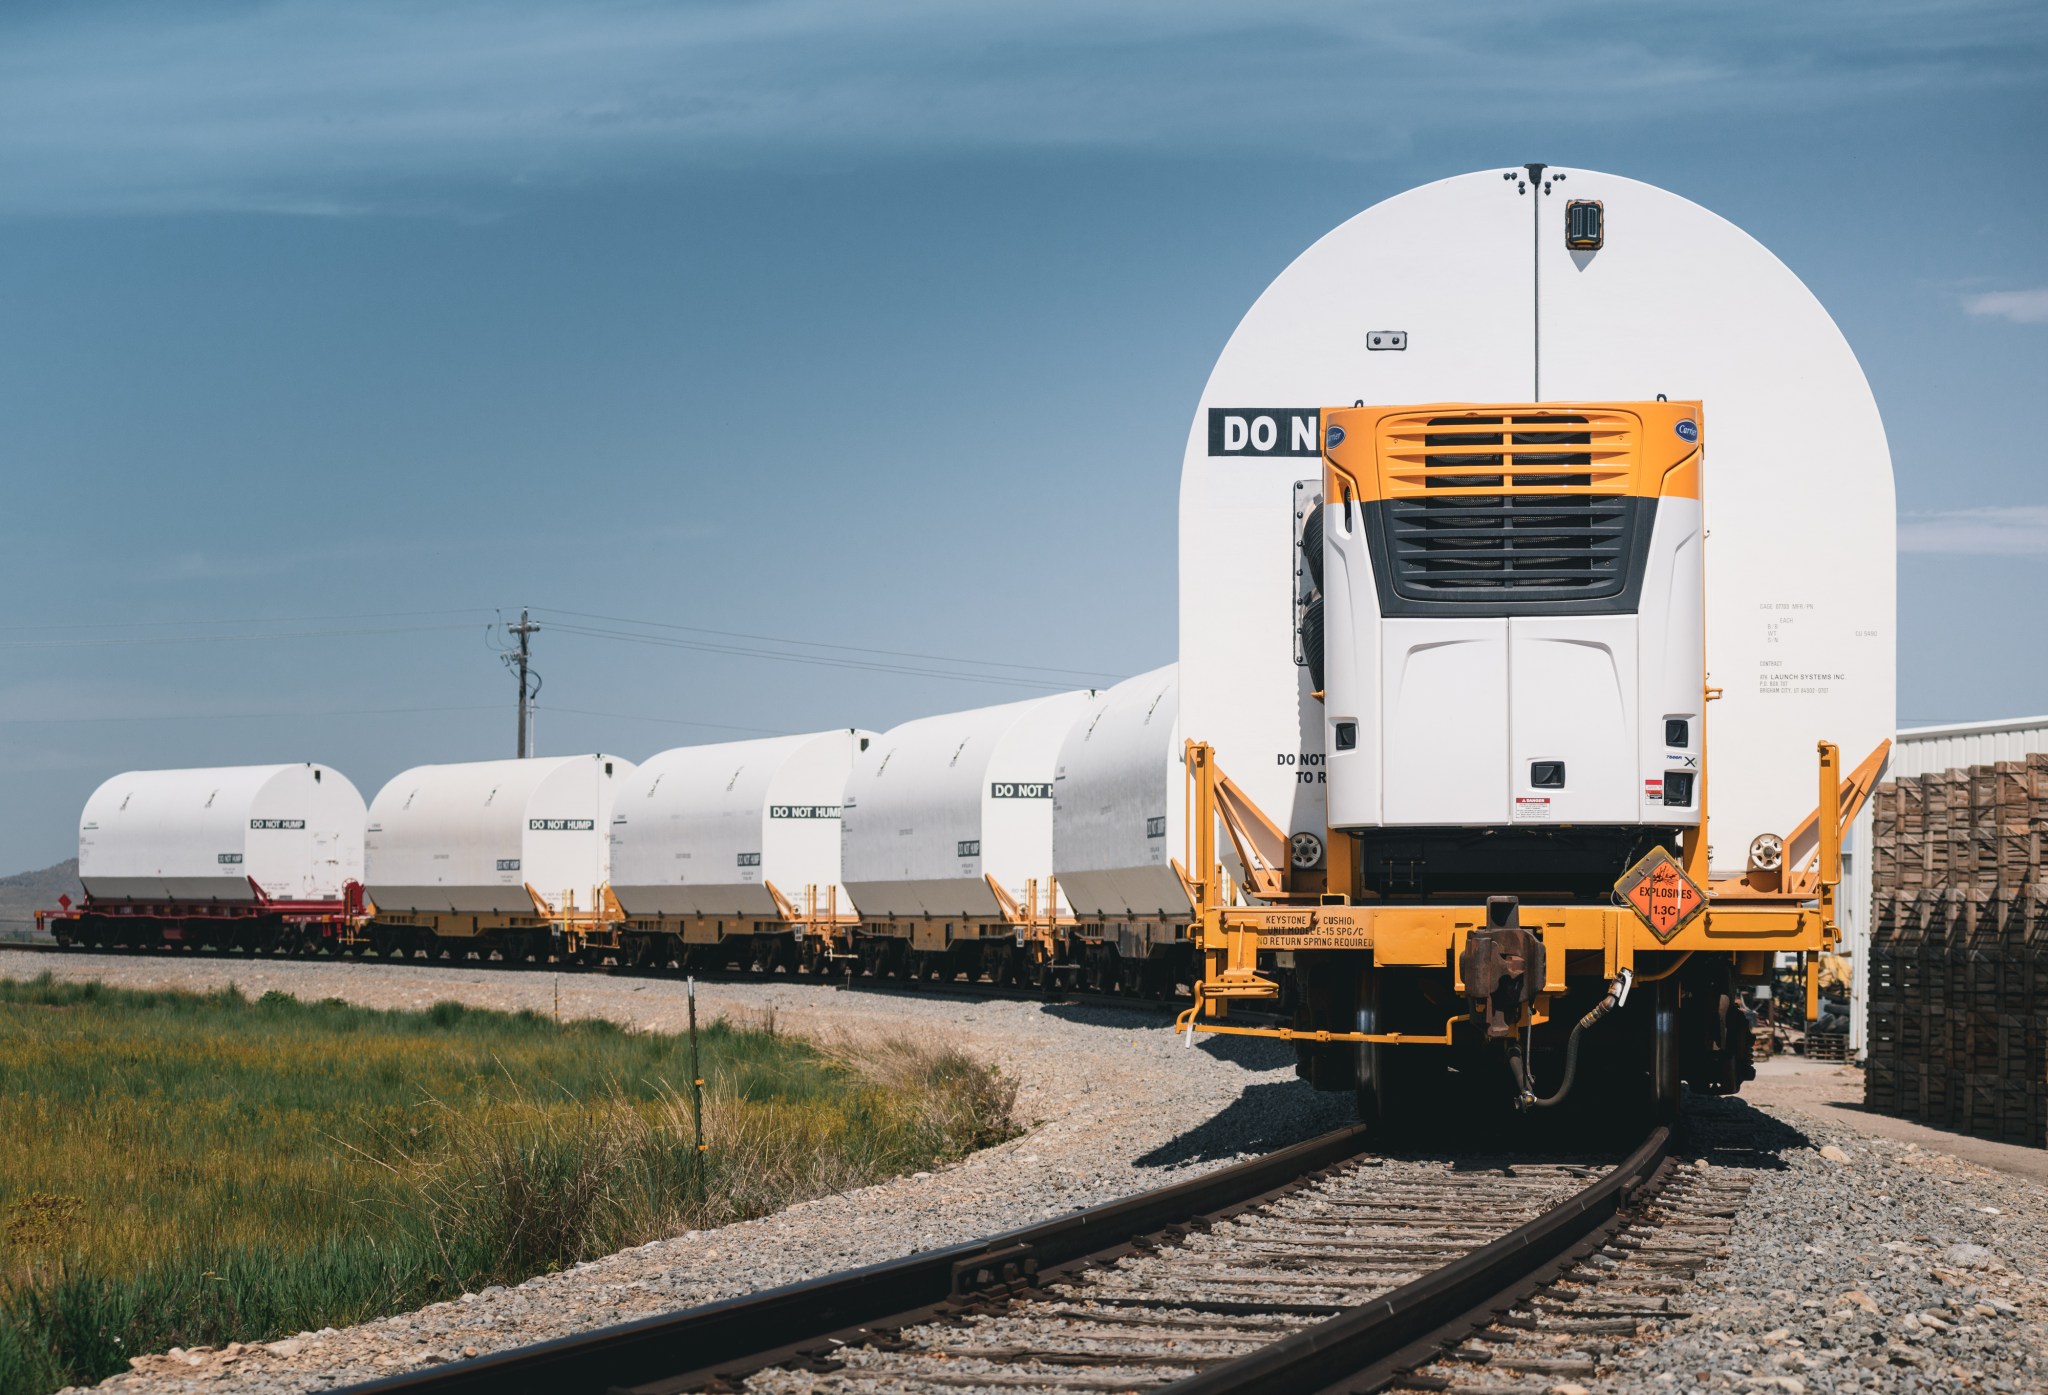 A train carrying the rocket motors for NASA’s Space Launch System rocket